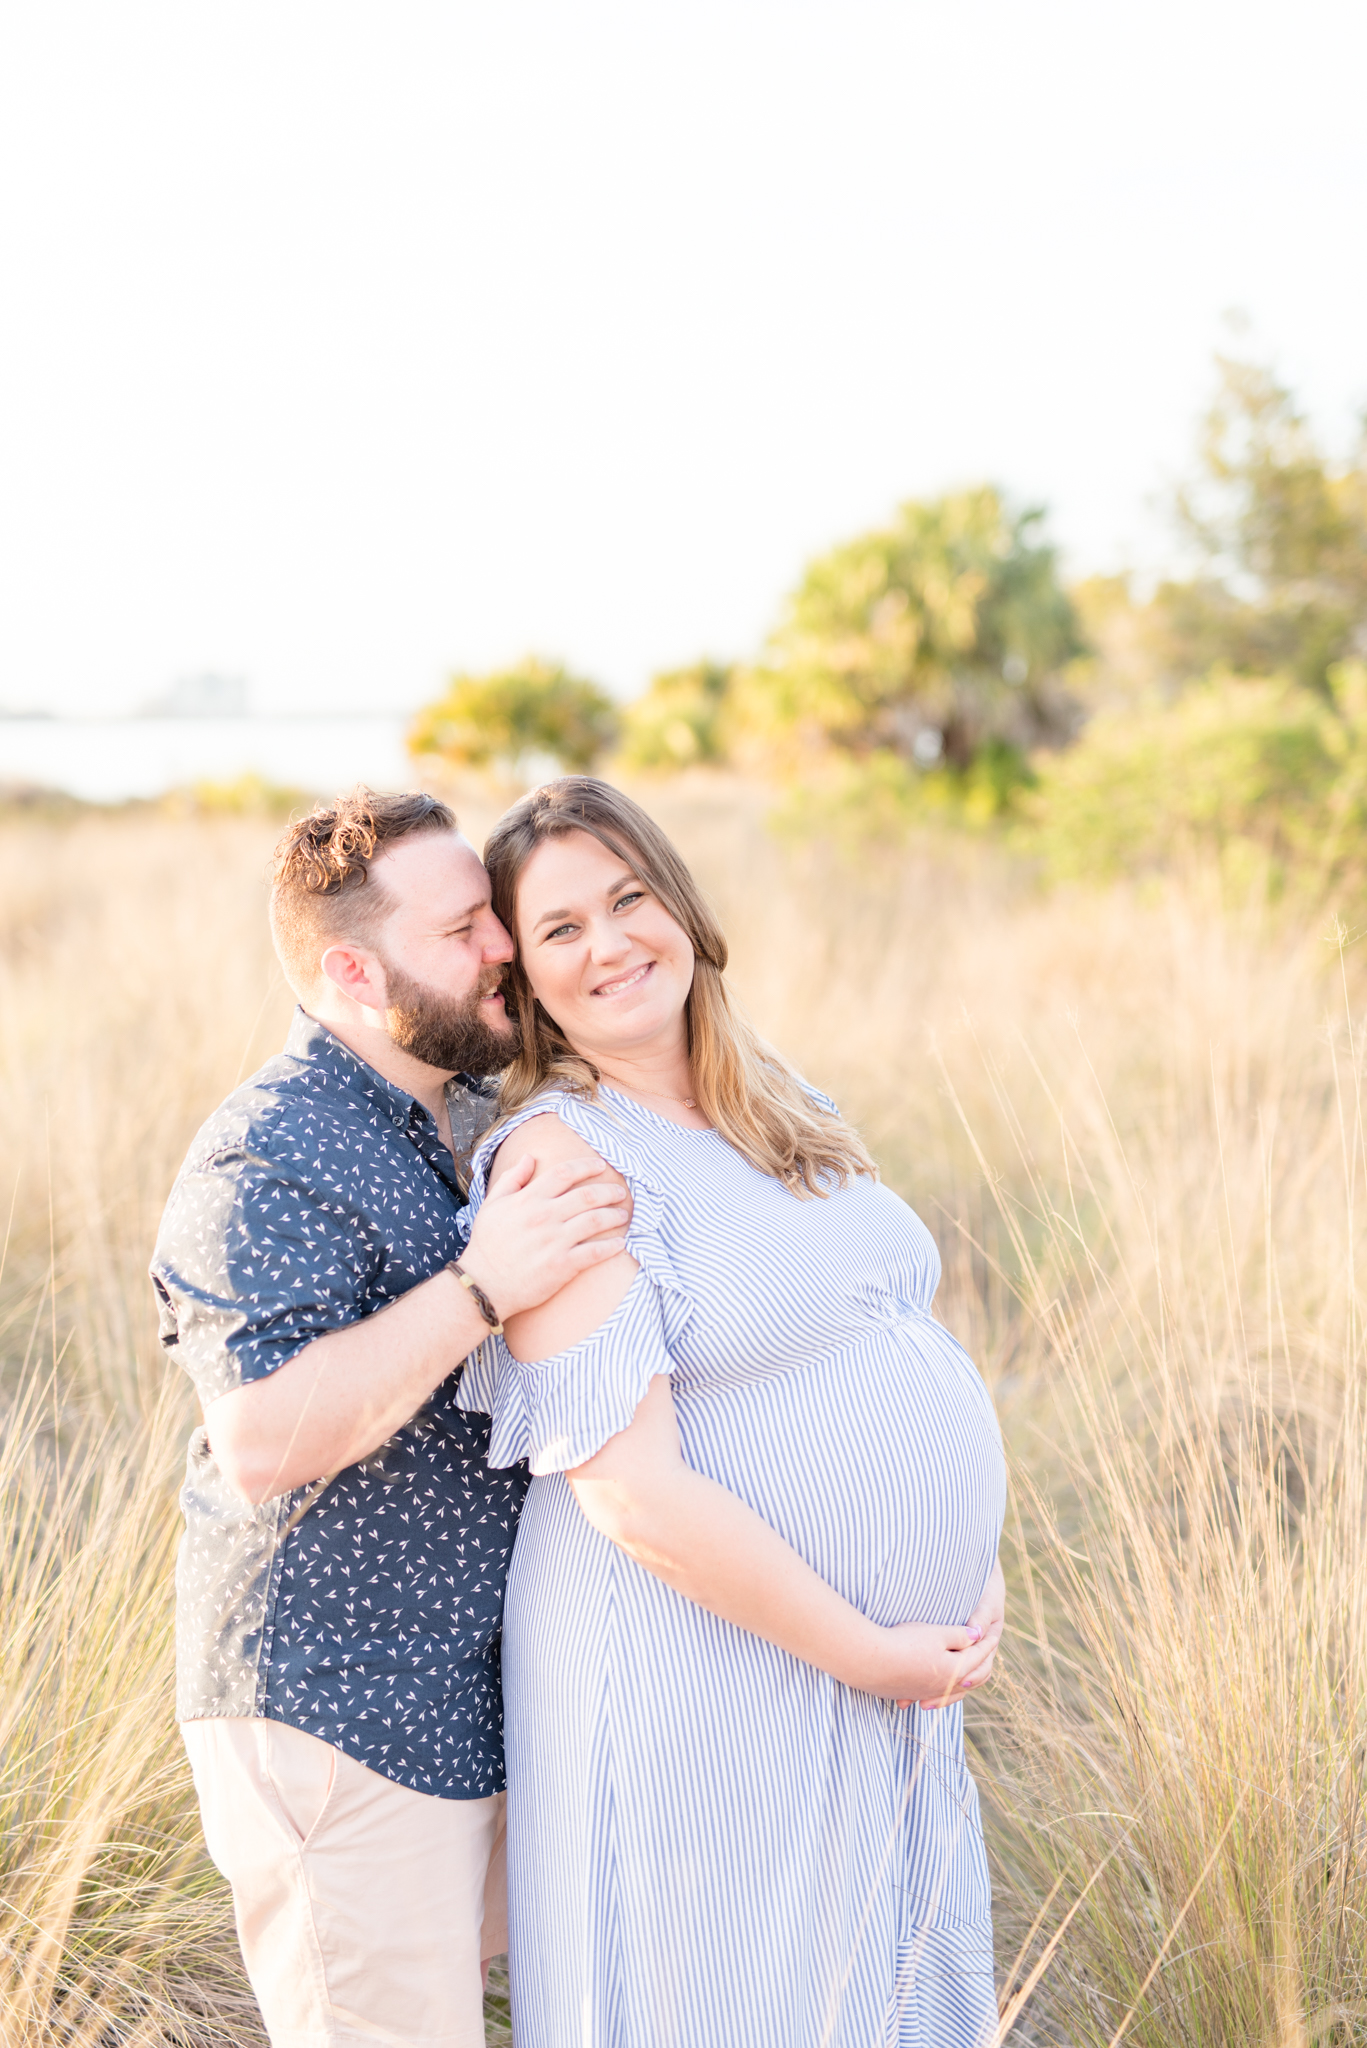 Expecting couple smiles during maternity session.